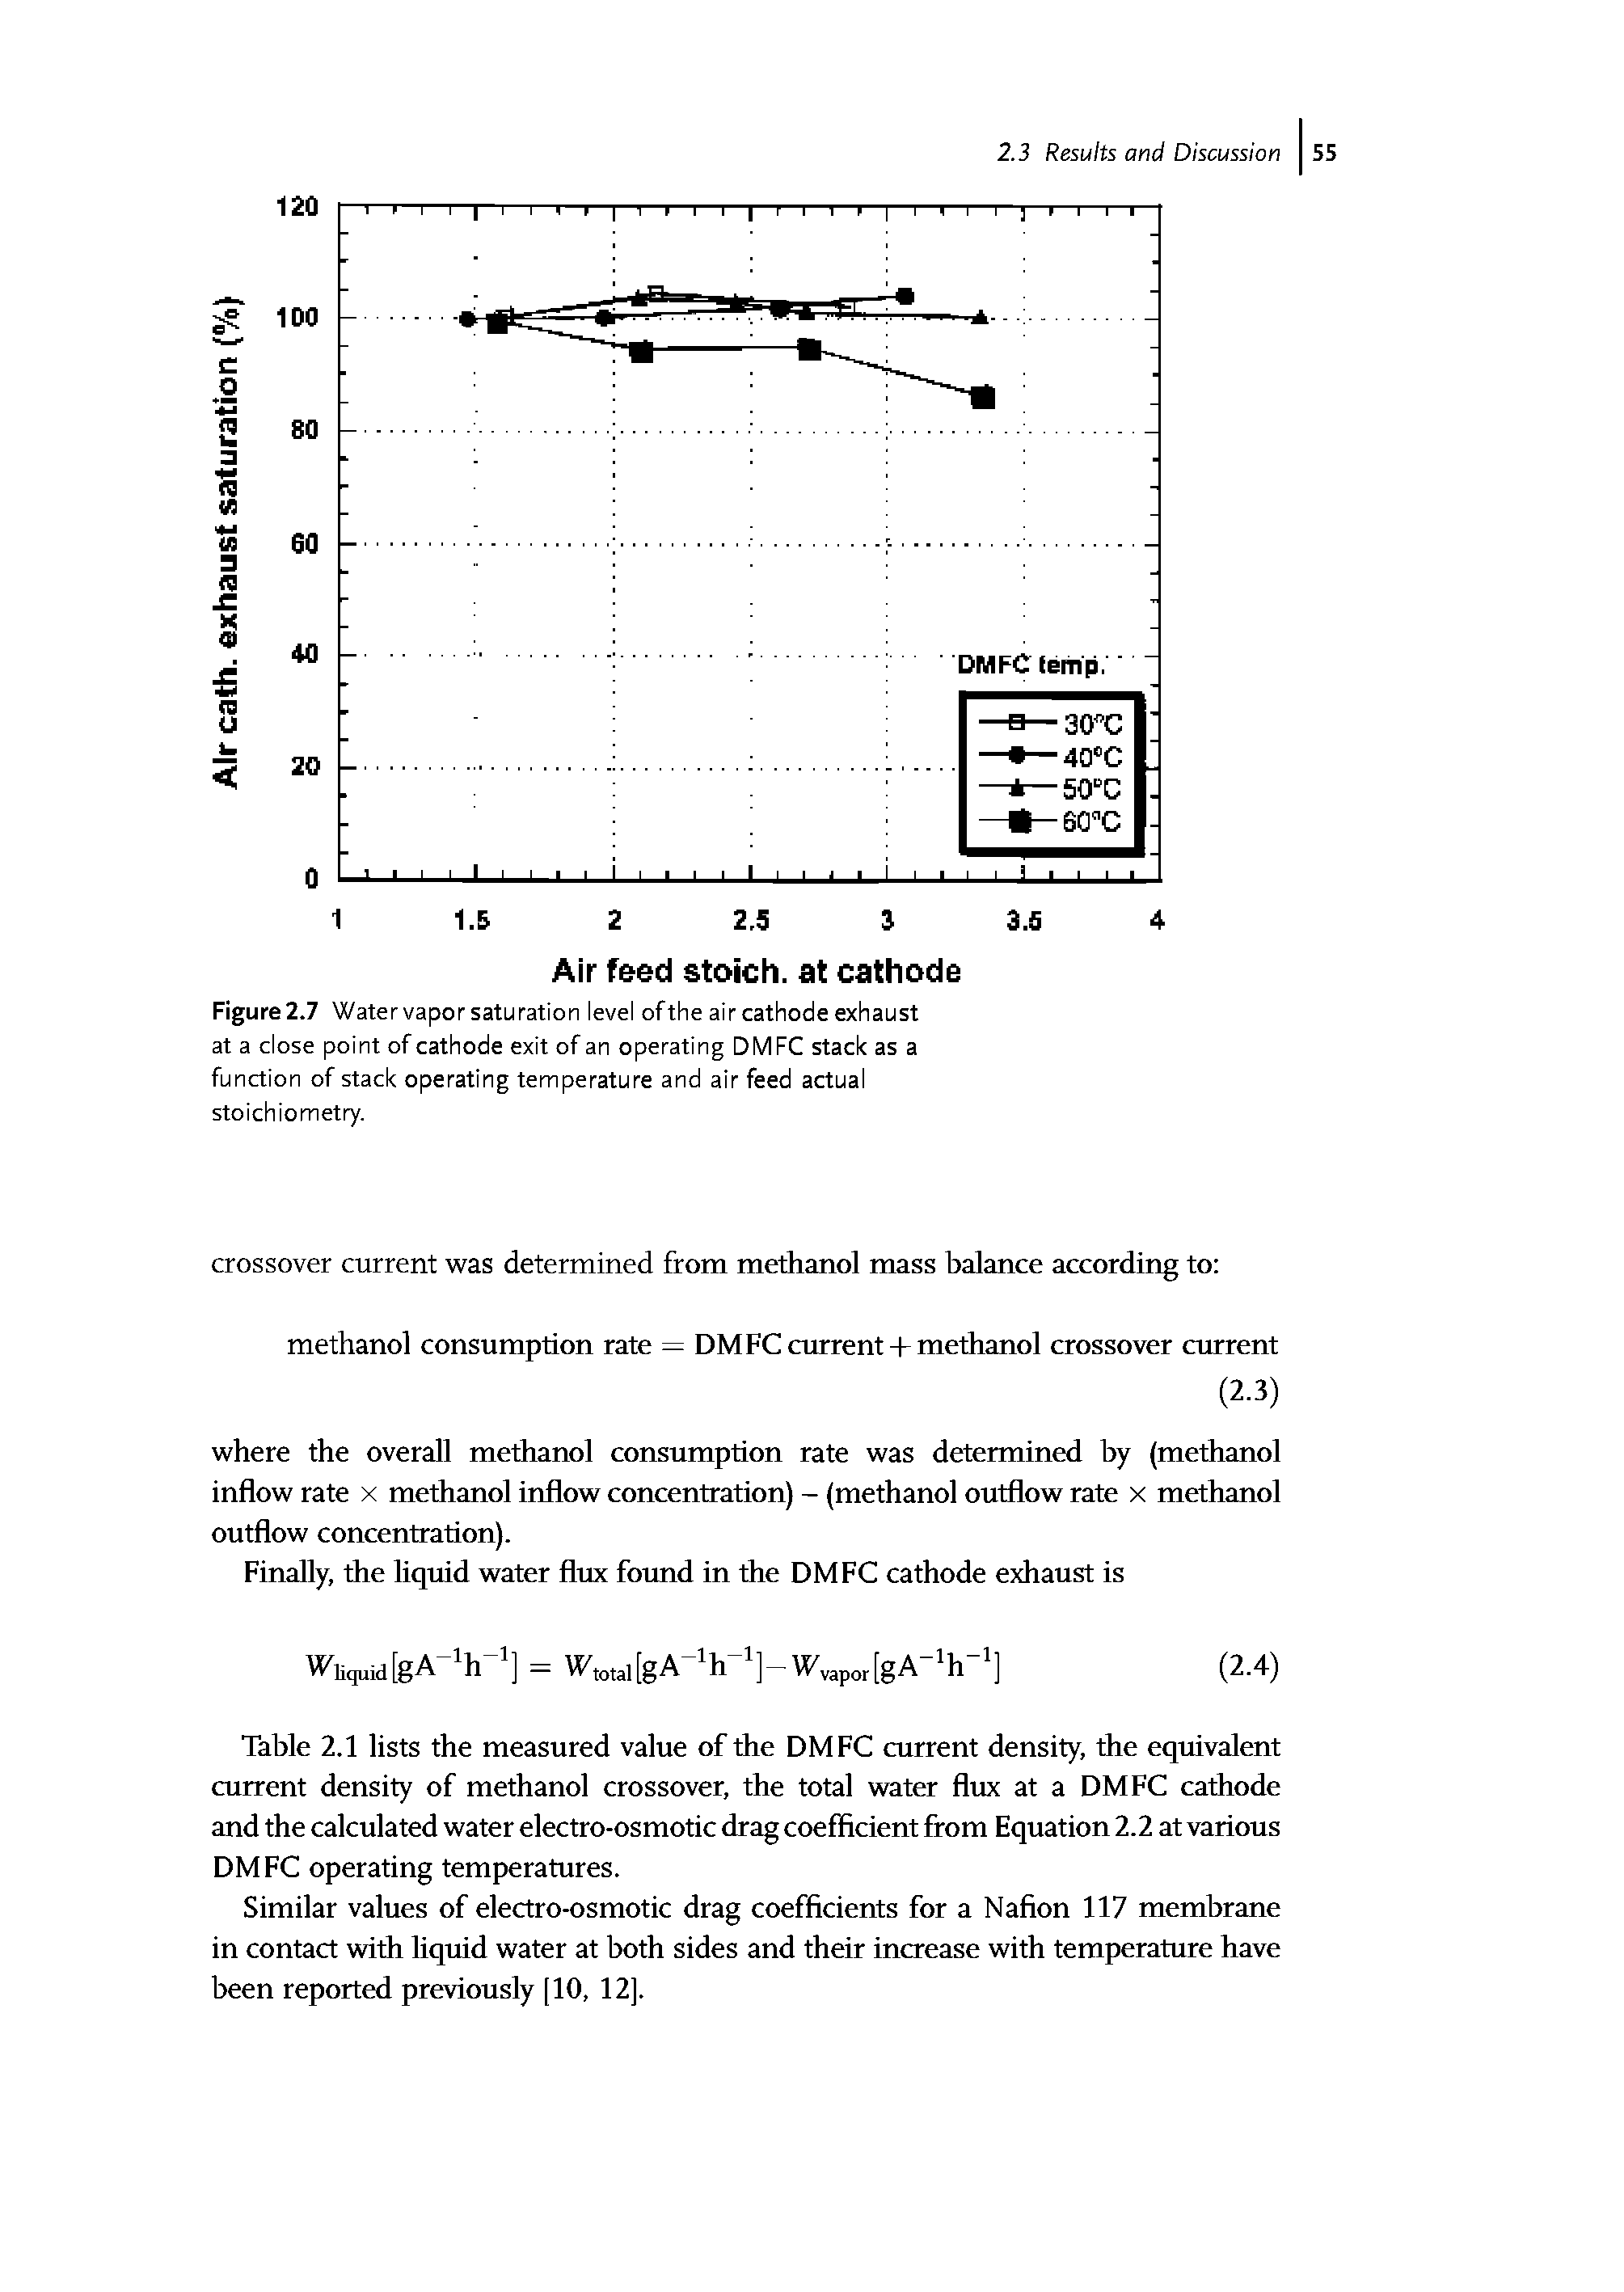 Figure 2.7 Water vapor saturation level of the air cathode exhaust at a close point of cathode exit of an operating DMFC stack as a function of stack operating temperature and air feed actual stoichiometry.